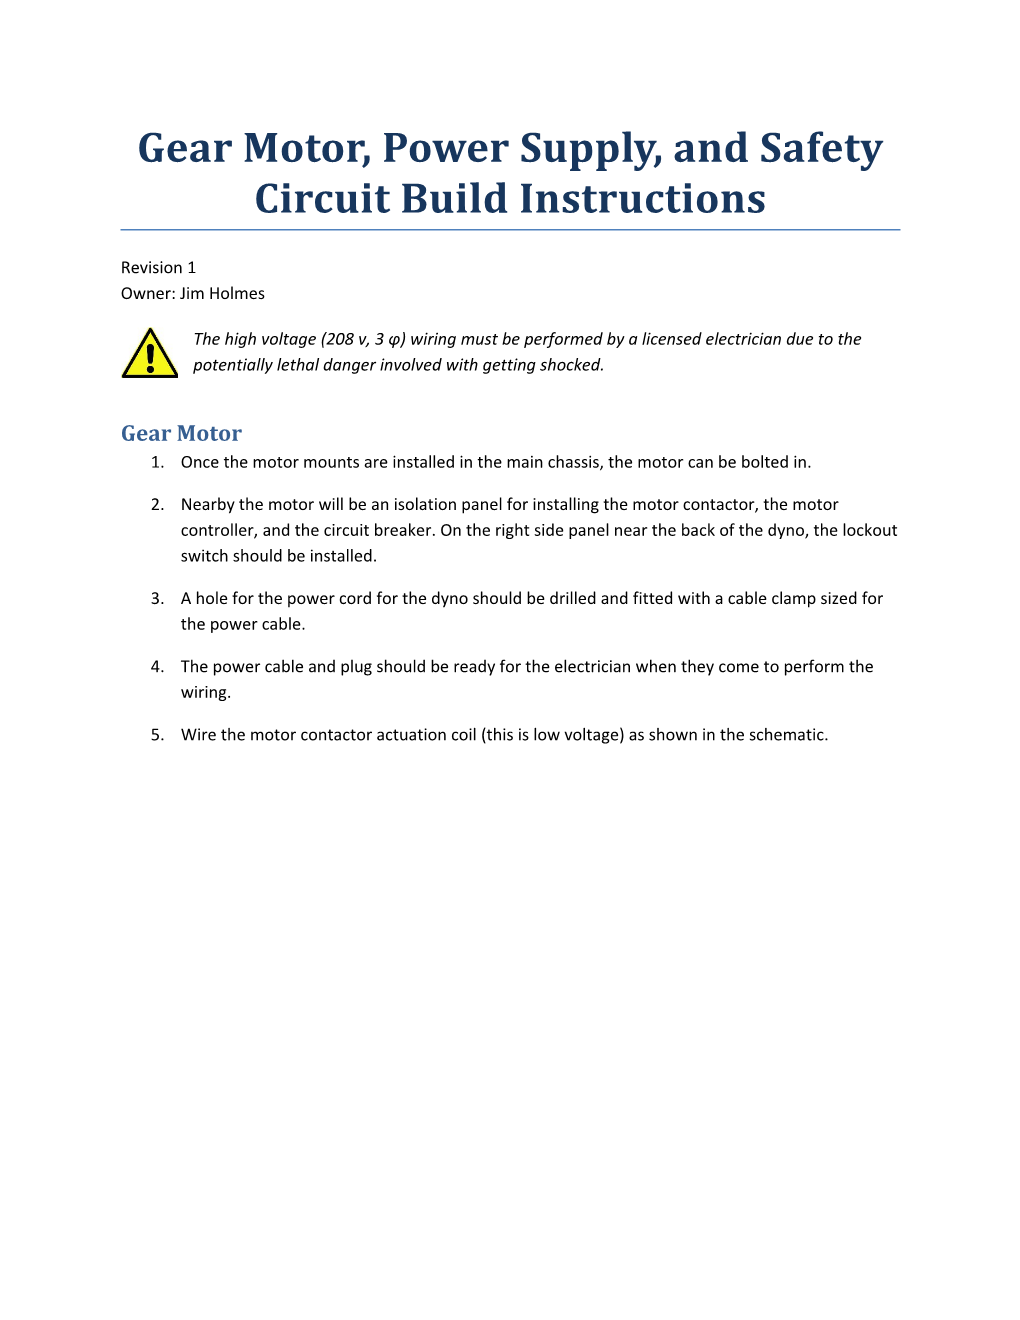 Gear Motor, Power Supply, and Safety Circuit Build Instructions